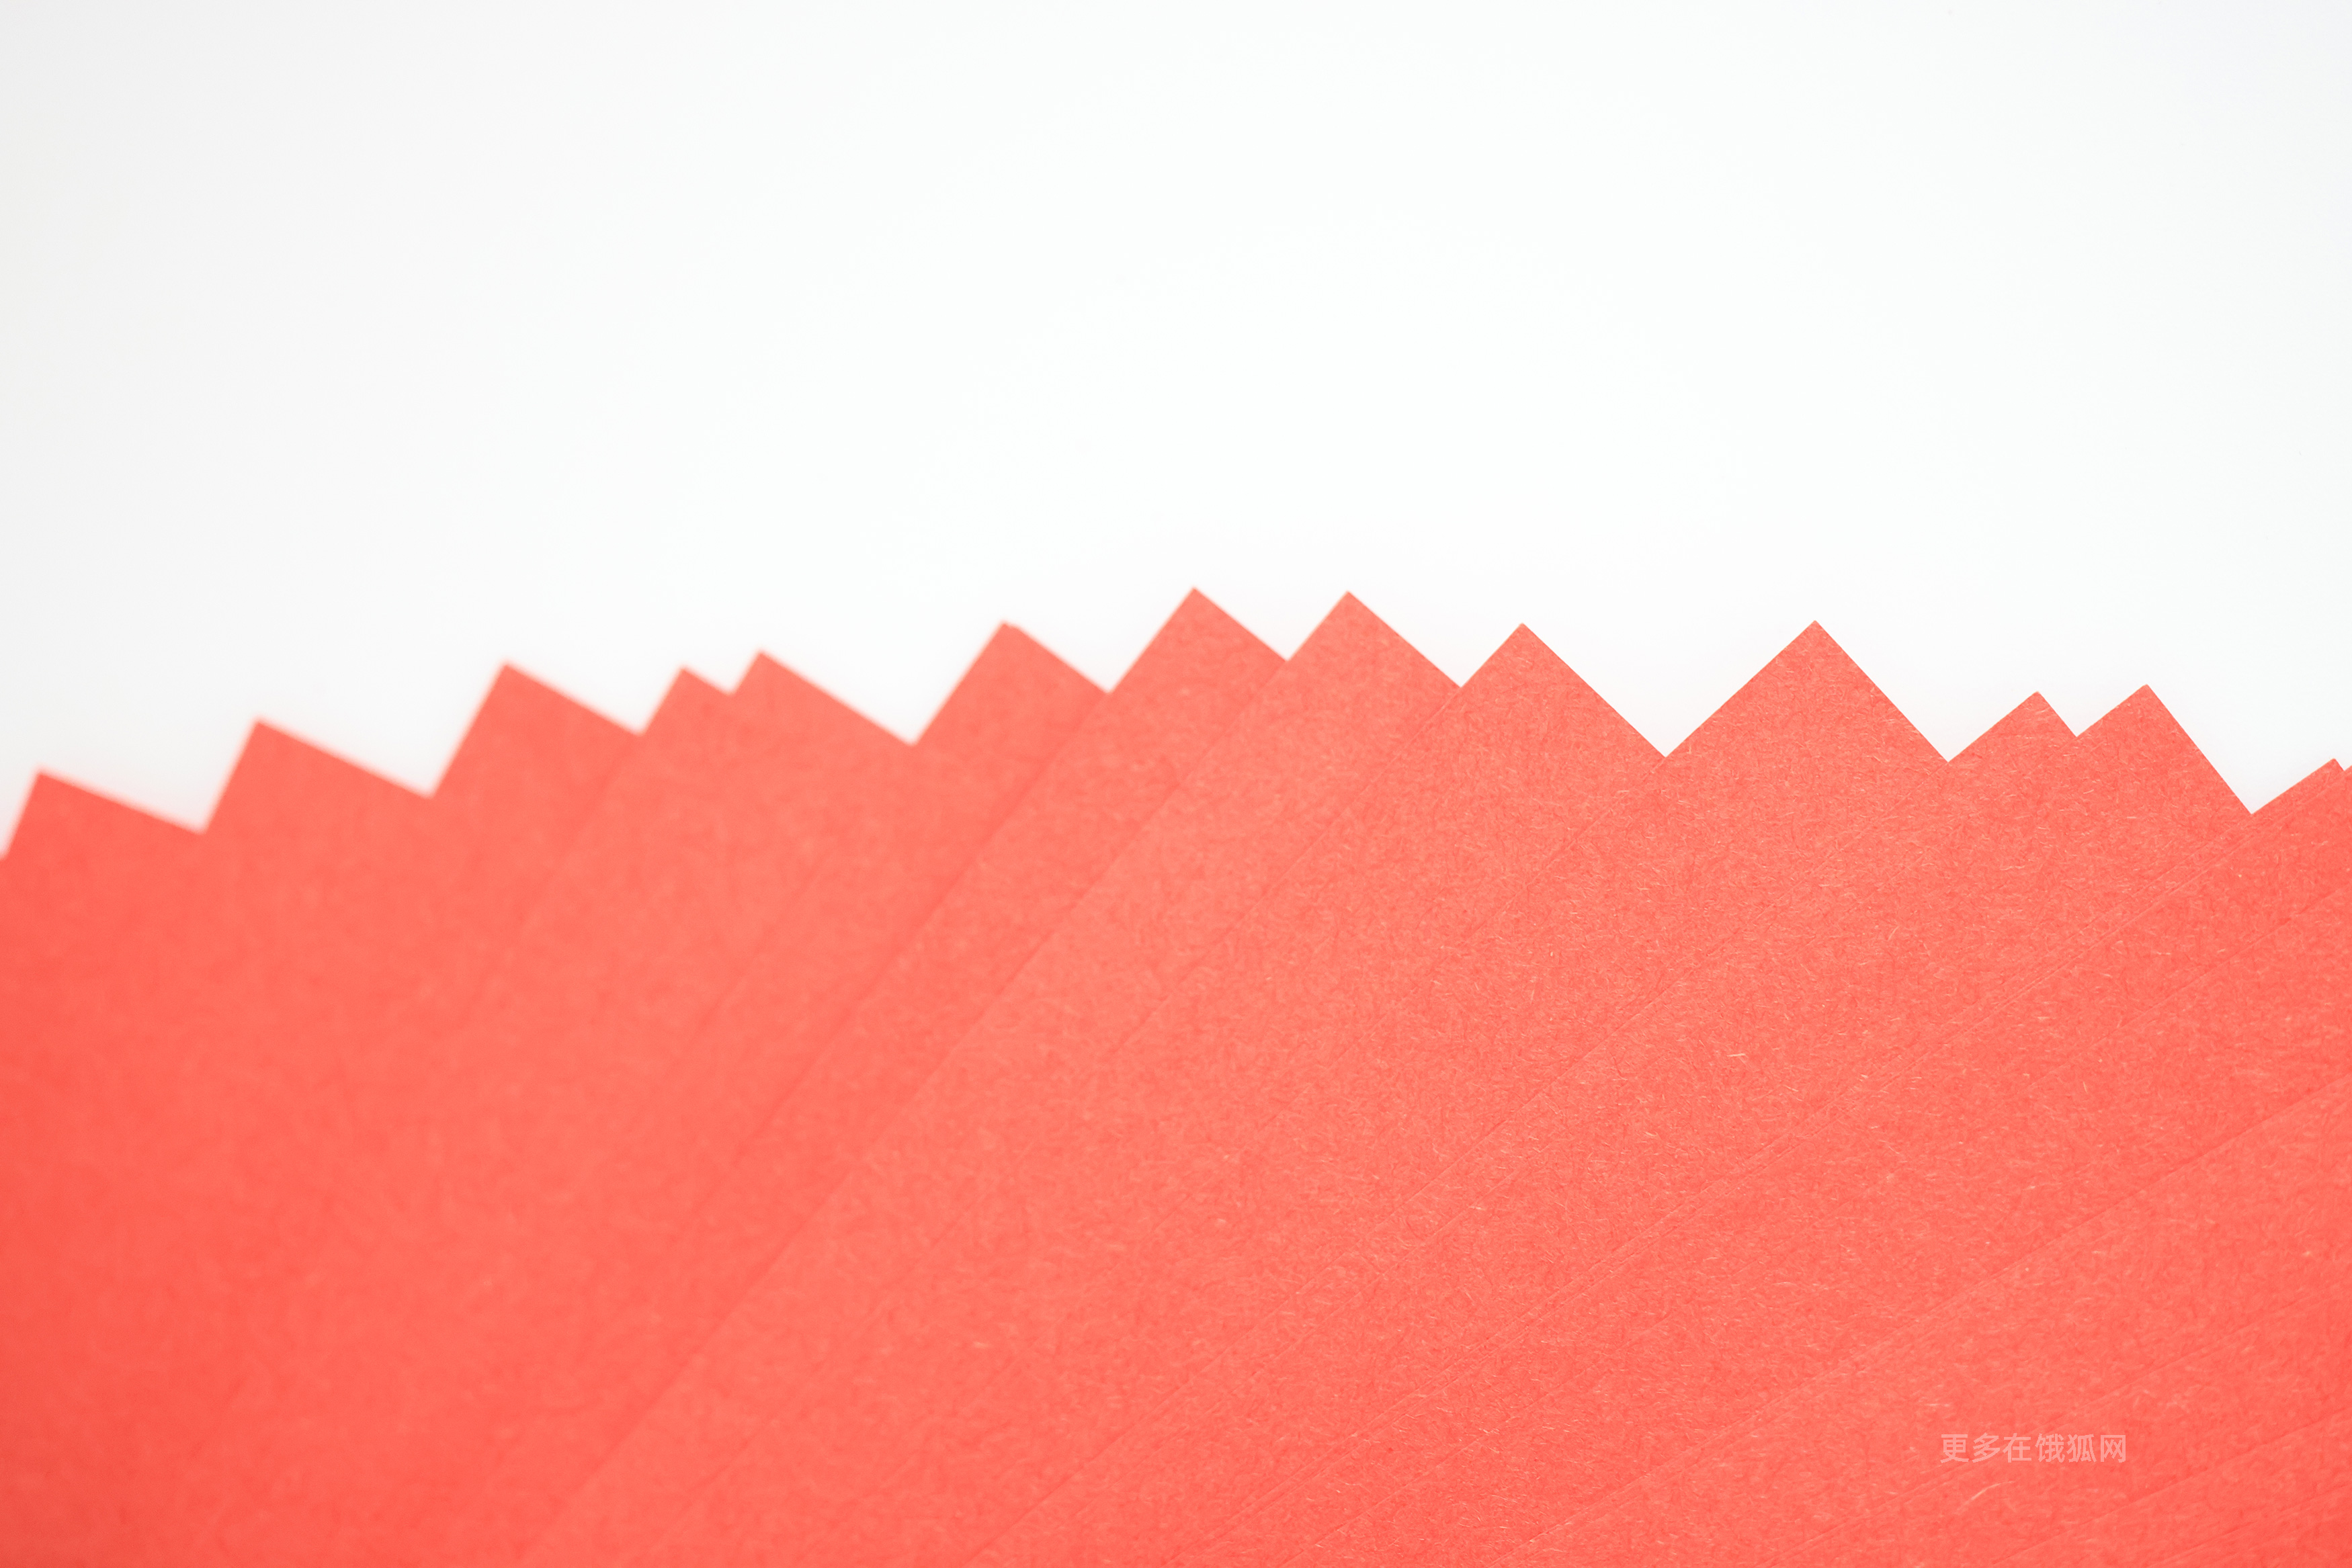 General 3500x2334 red background paper simple background minimalism